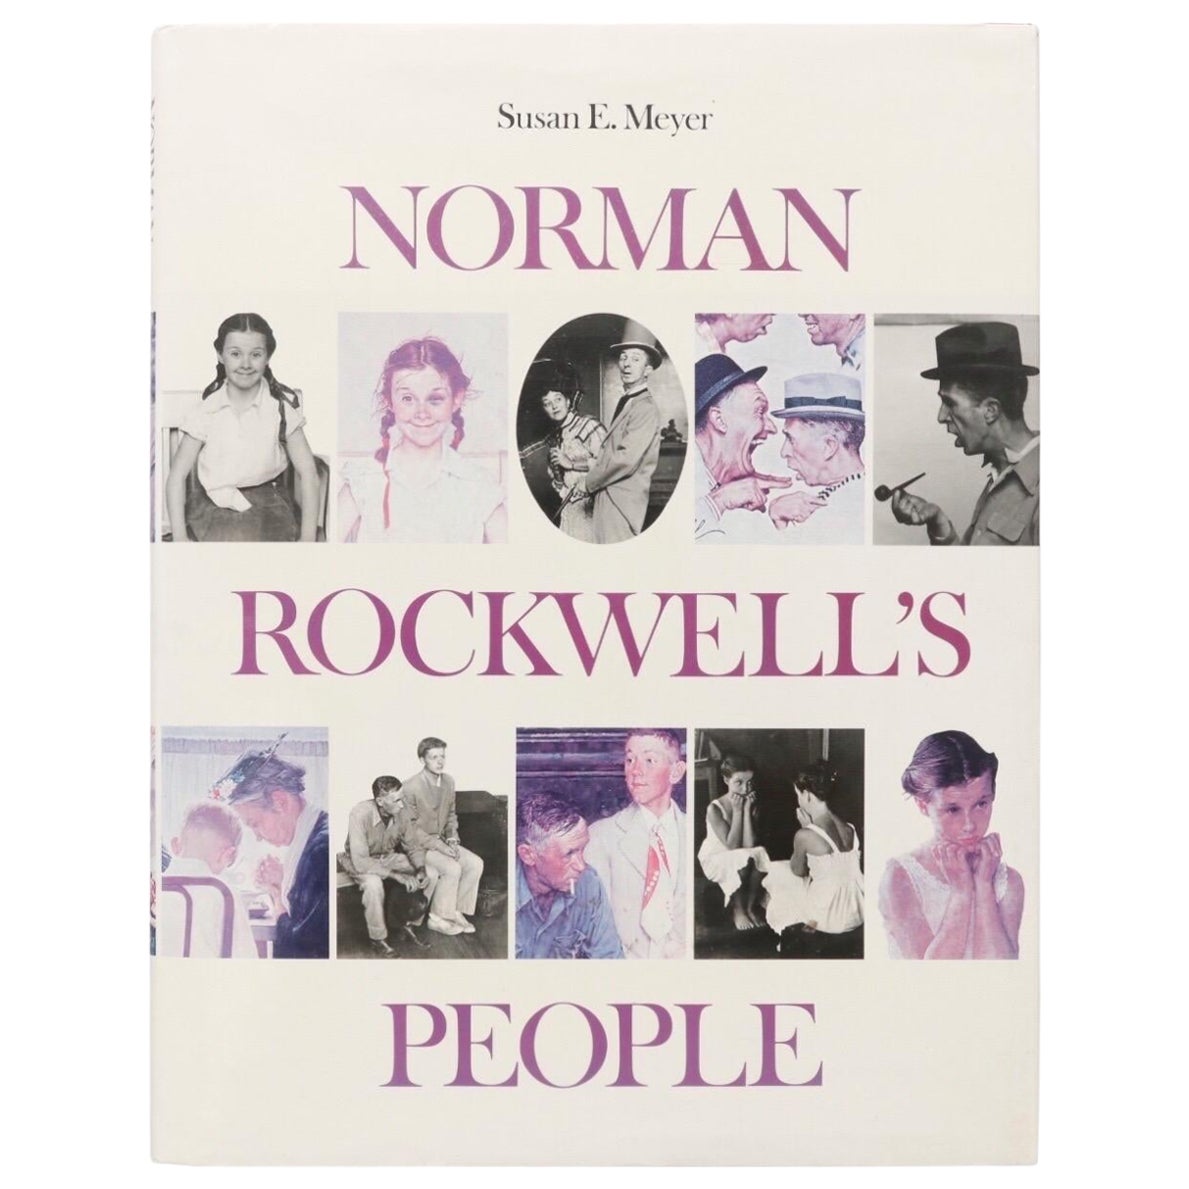 Norman Rockwell’s People by Susan E. Meyer For Sale